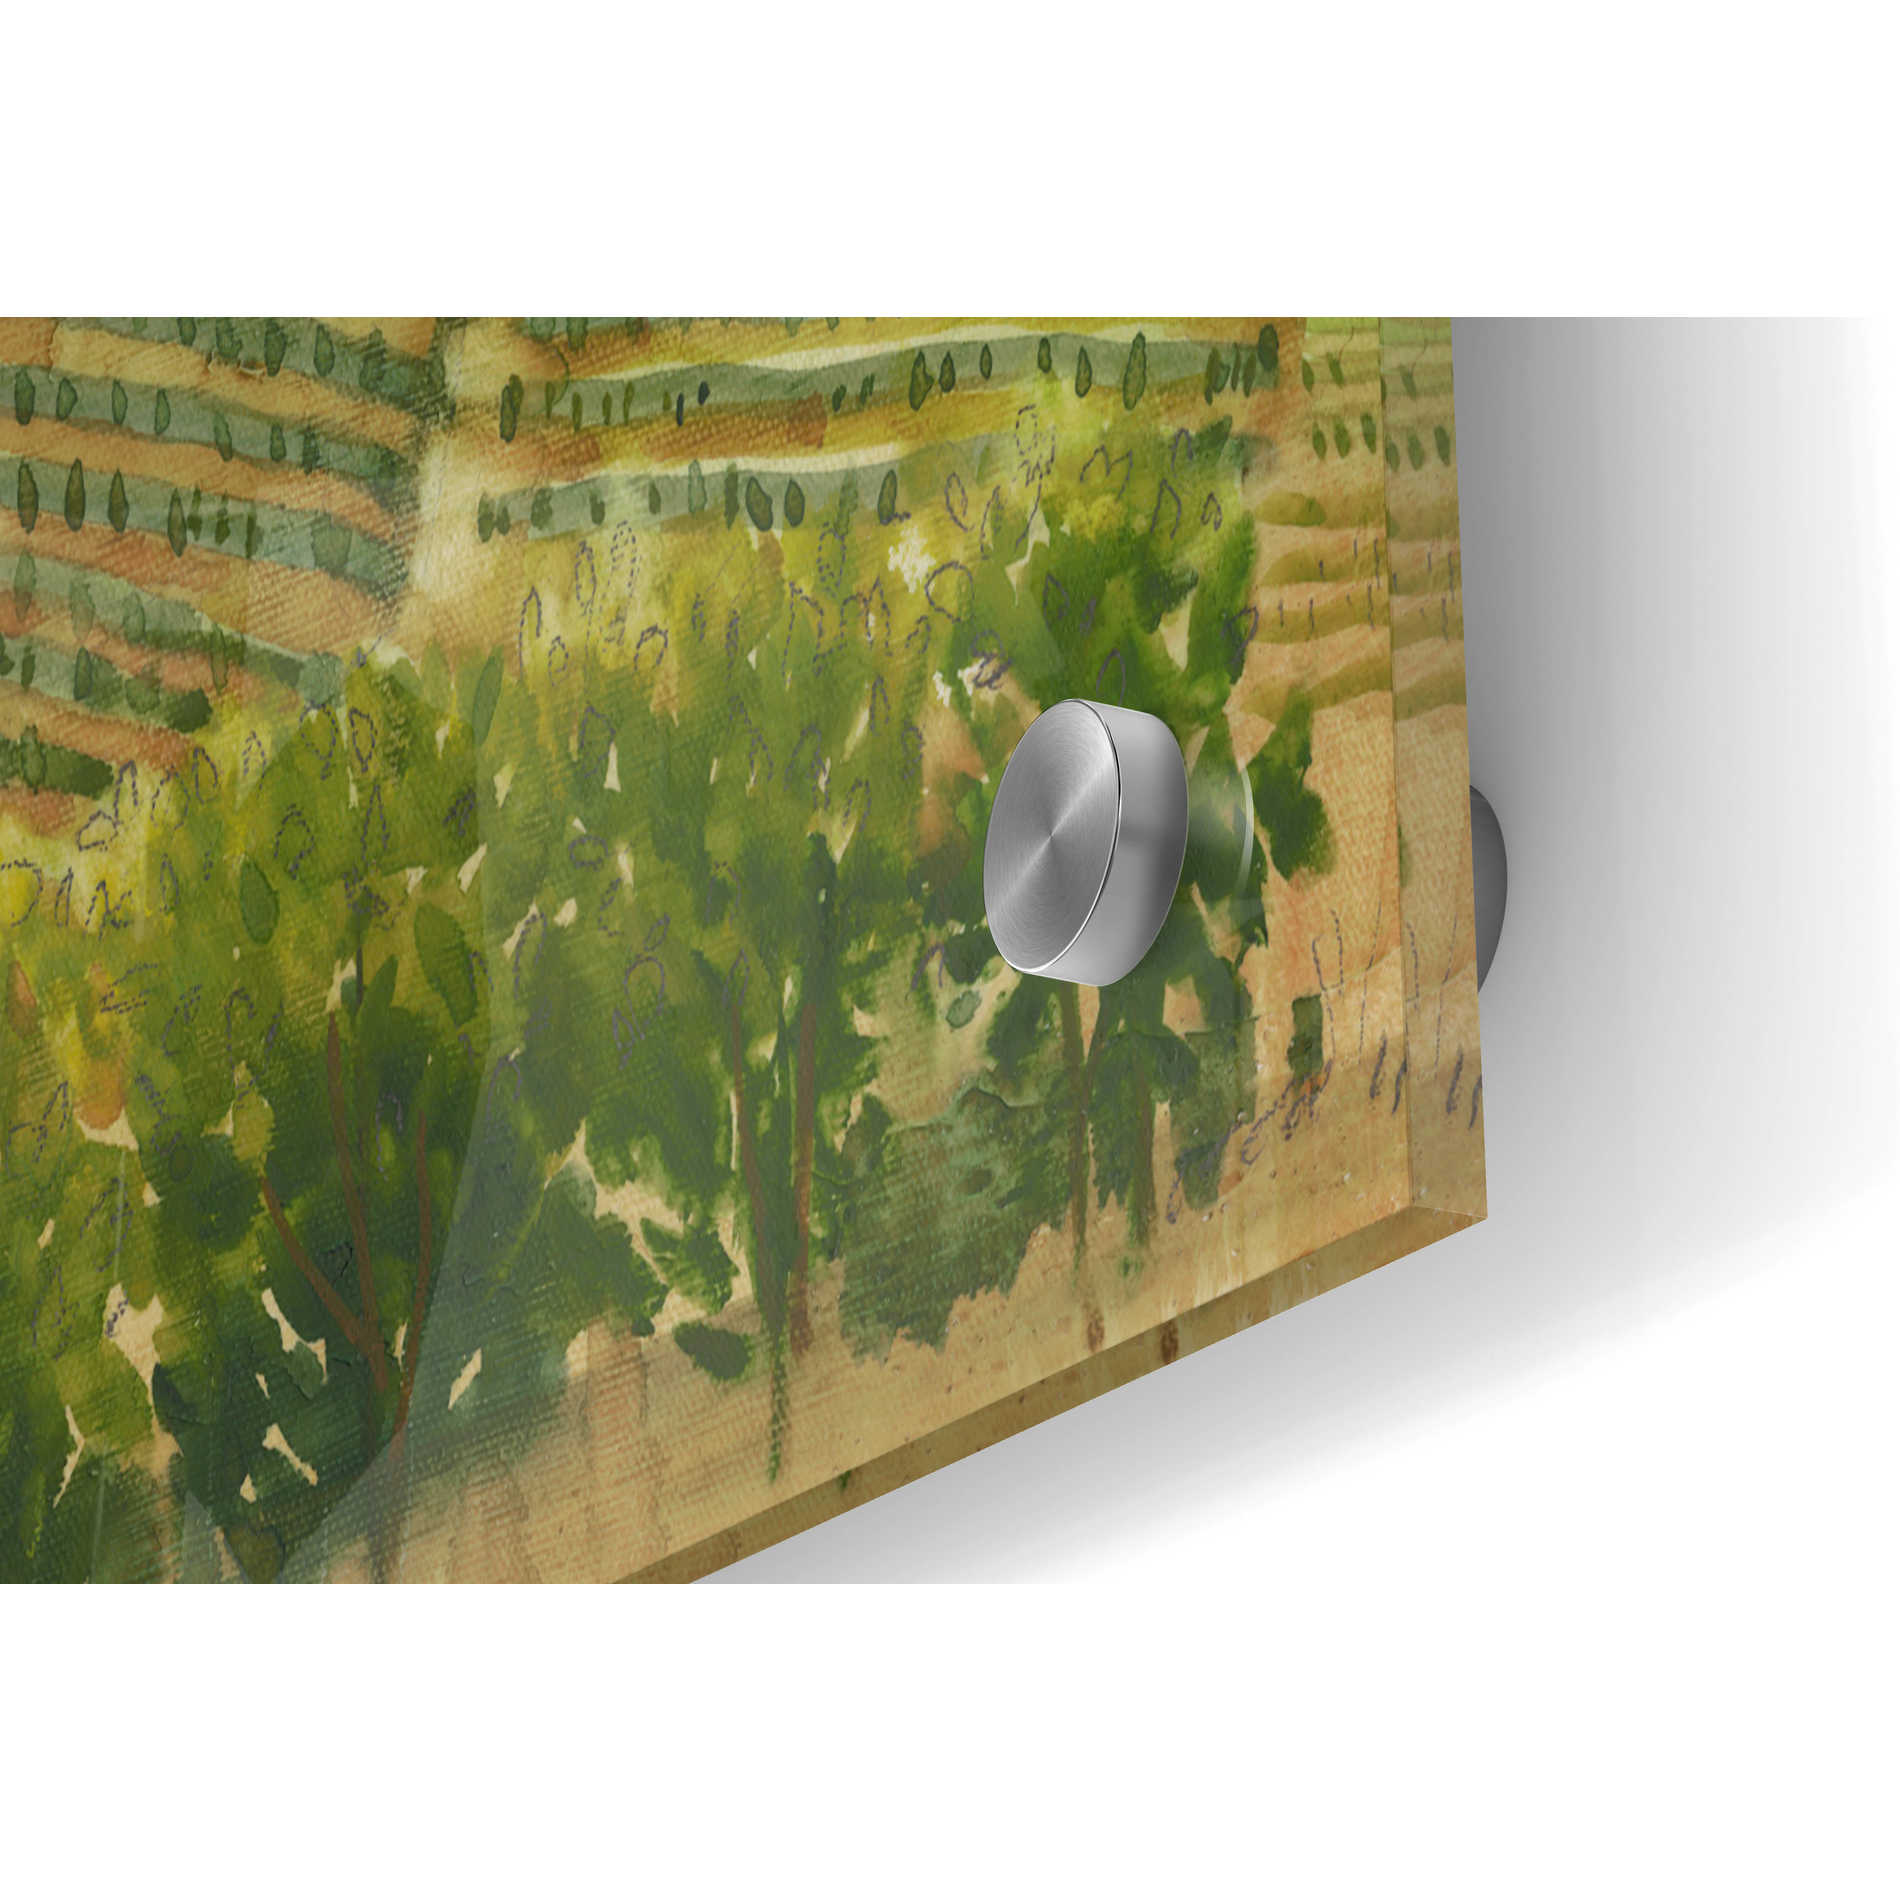 Epic Art 'Wine Country View II' by Tim O'Toole, Acrylic Glass Wall Art,36x24